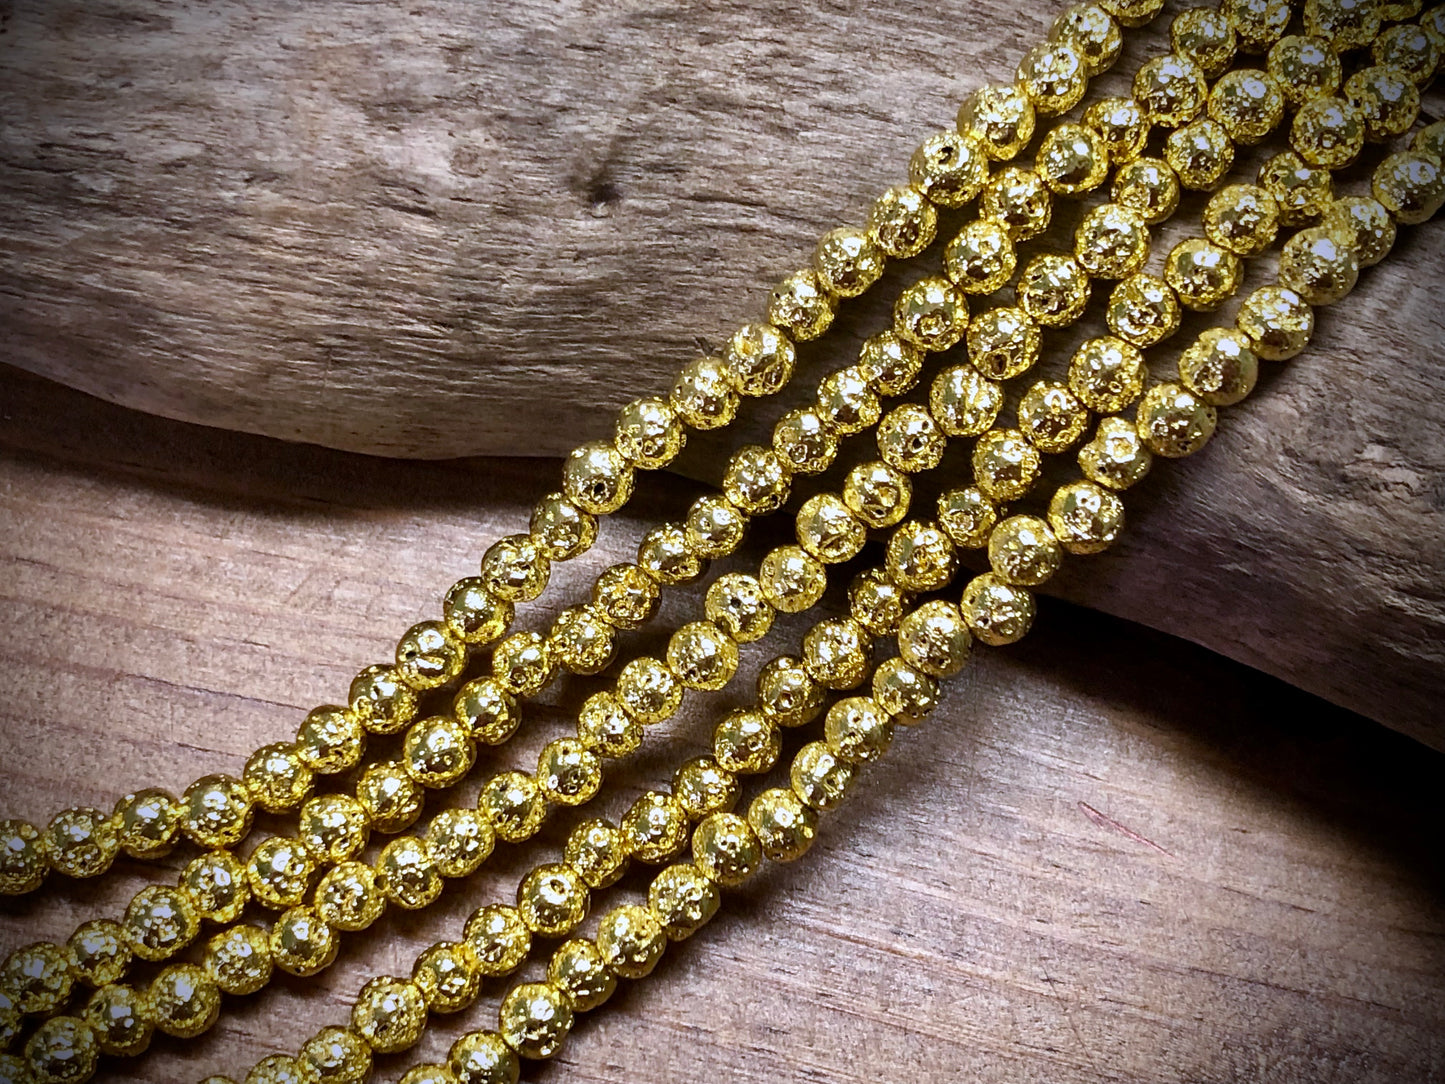 Electro-Coated Lava Bead Strand - Yellow Gold - 4mm - 8”